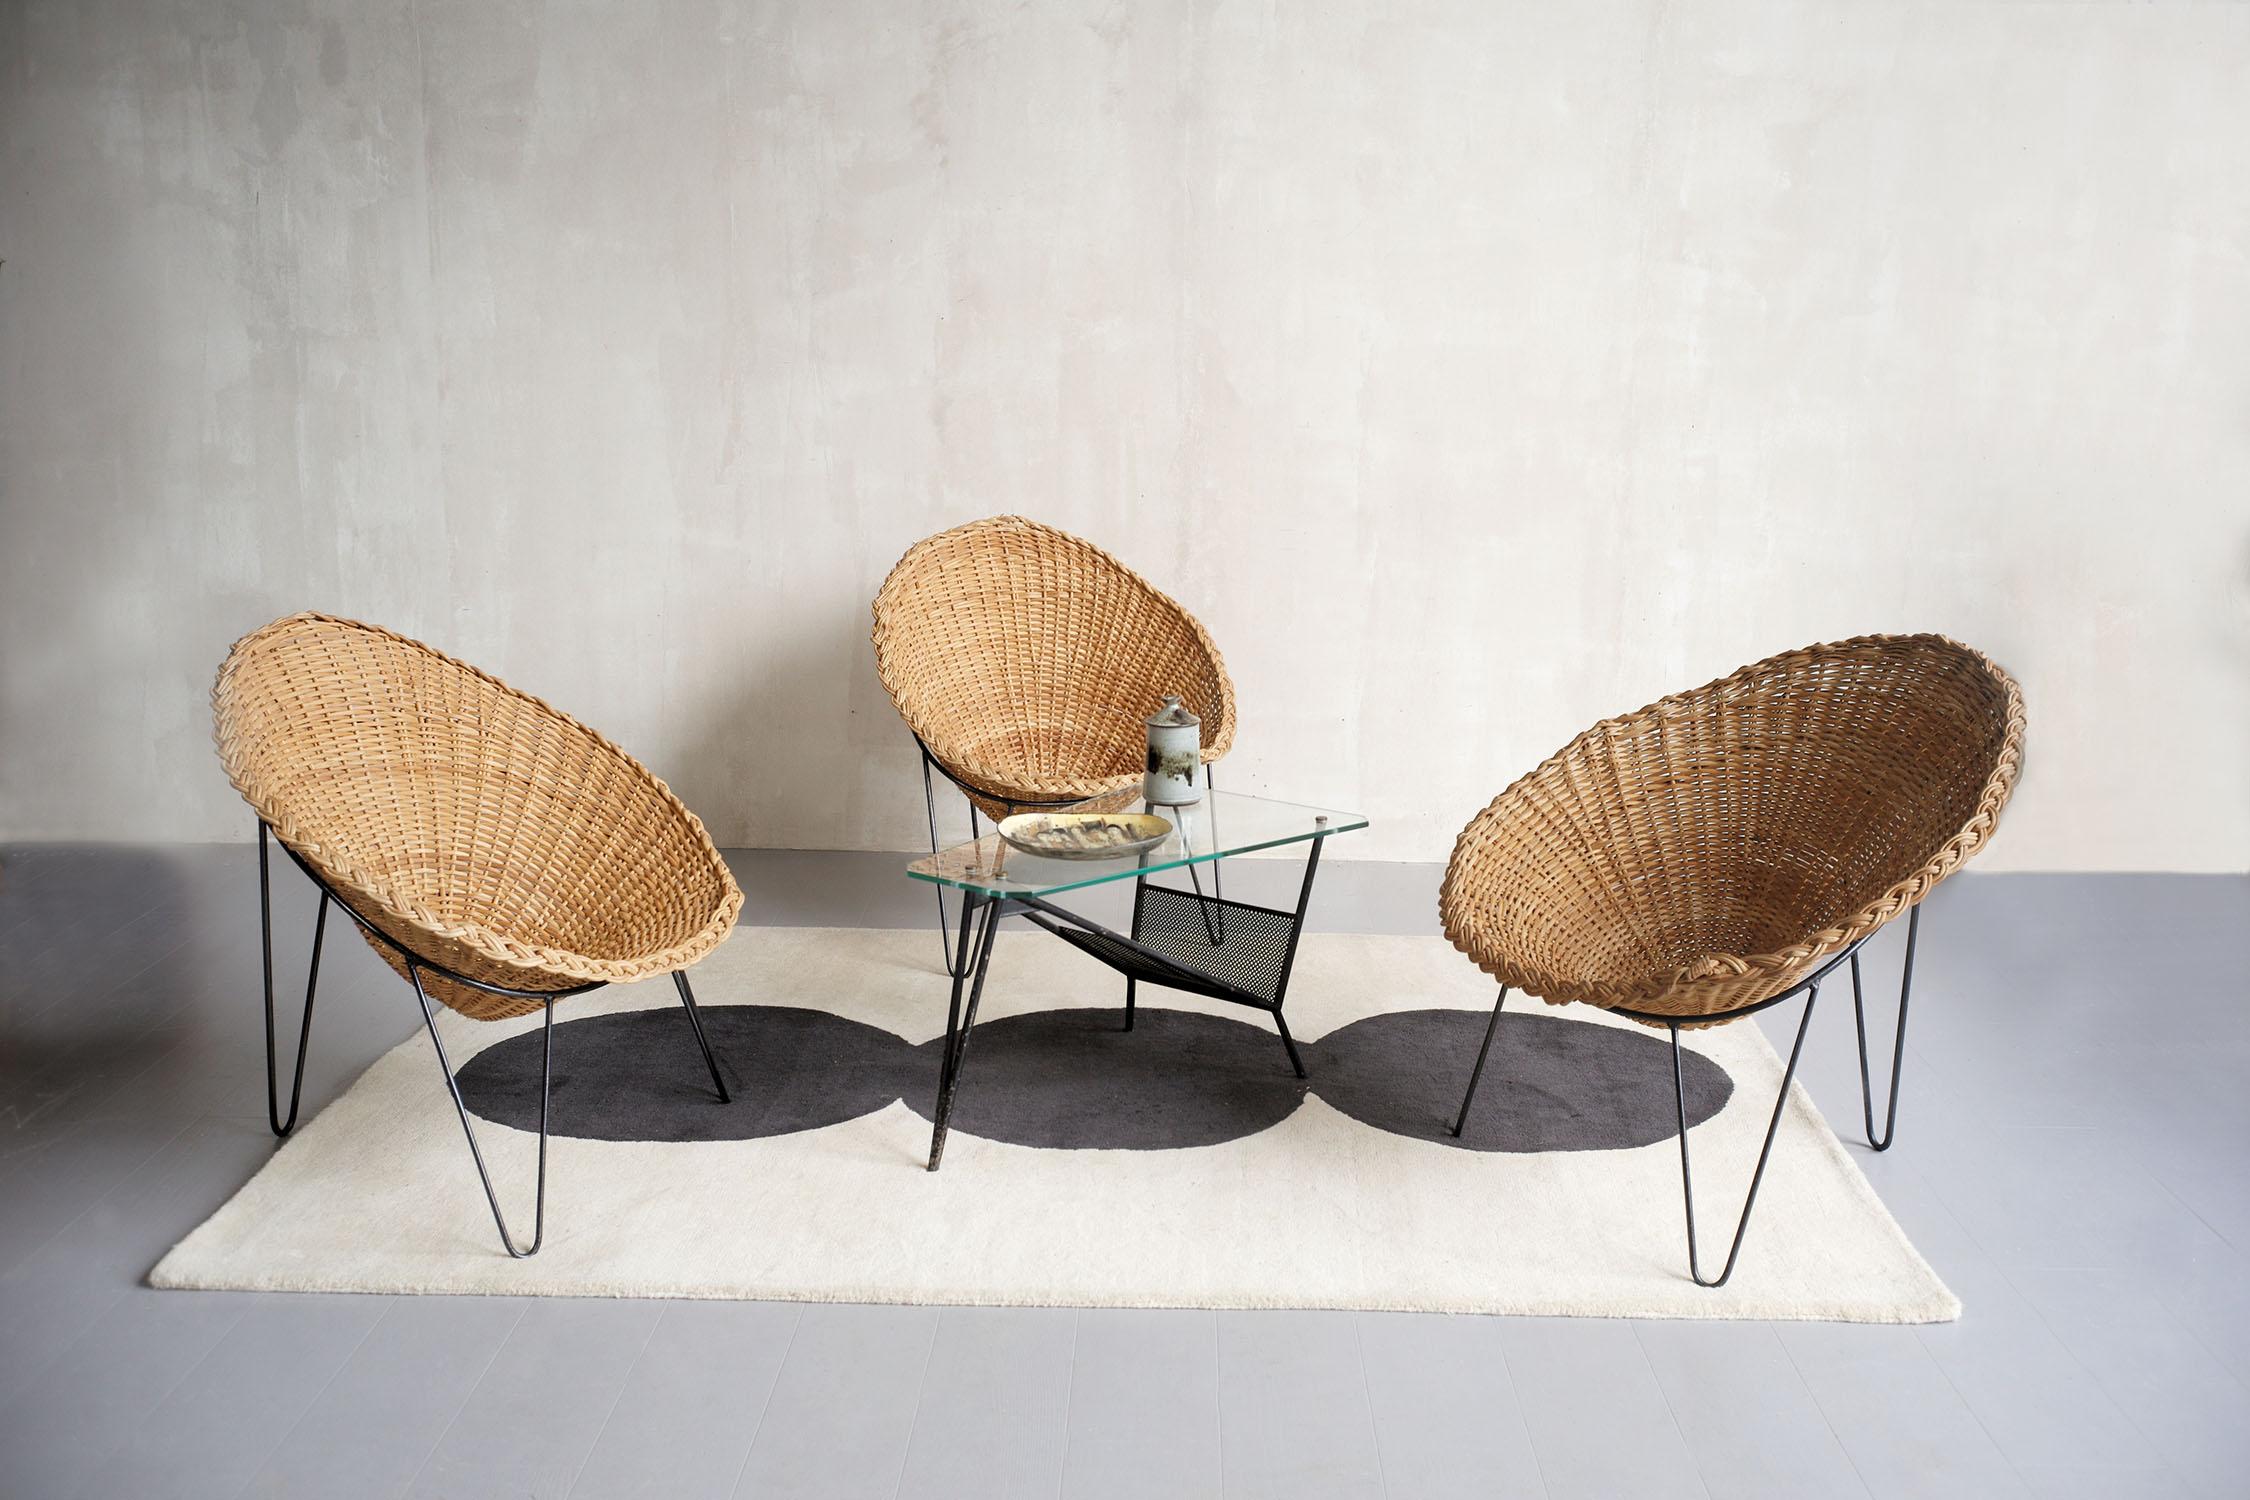 Set of 3 Rattan Armchairs, Italy, 1950 For Sale 6